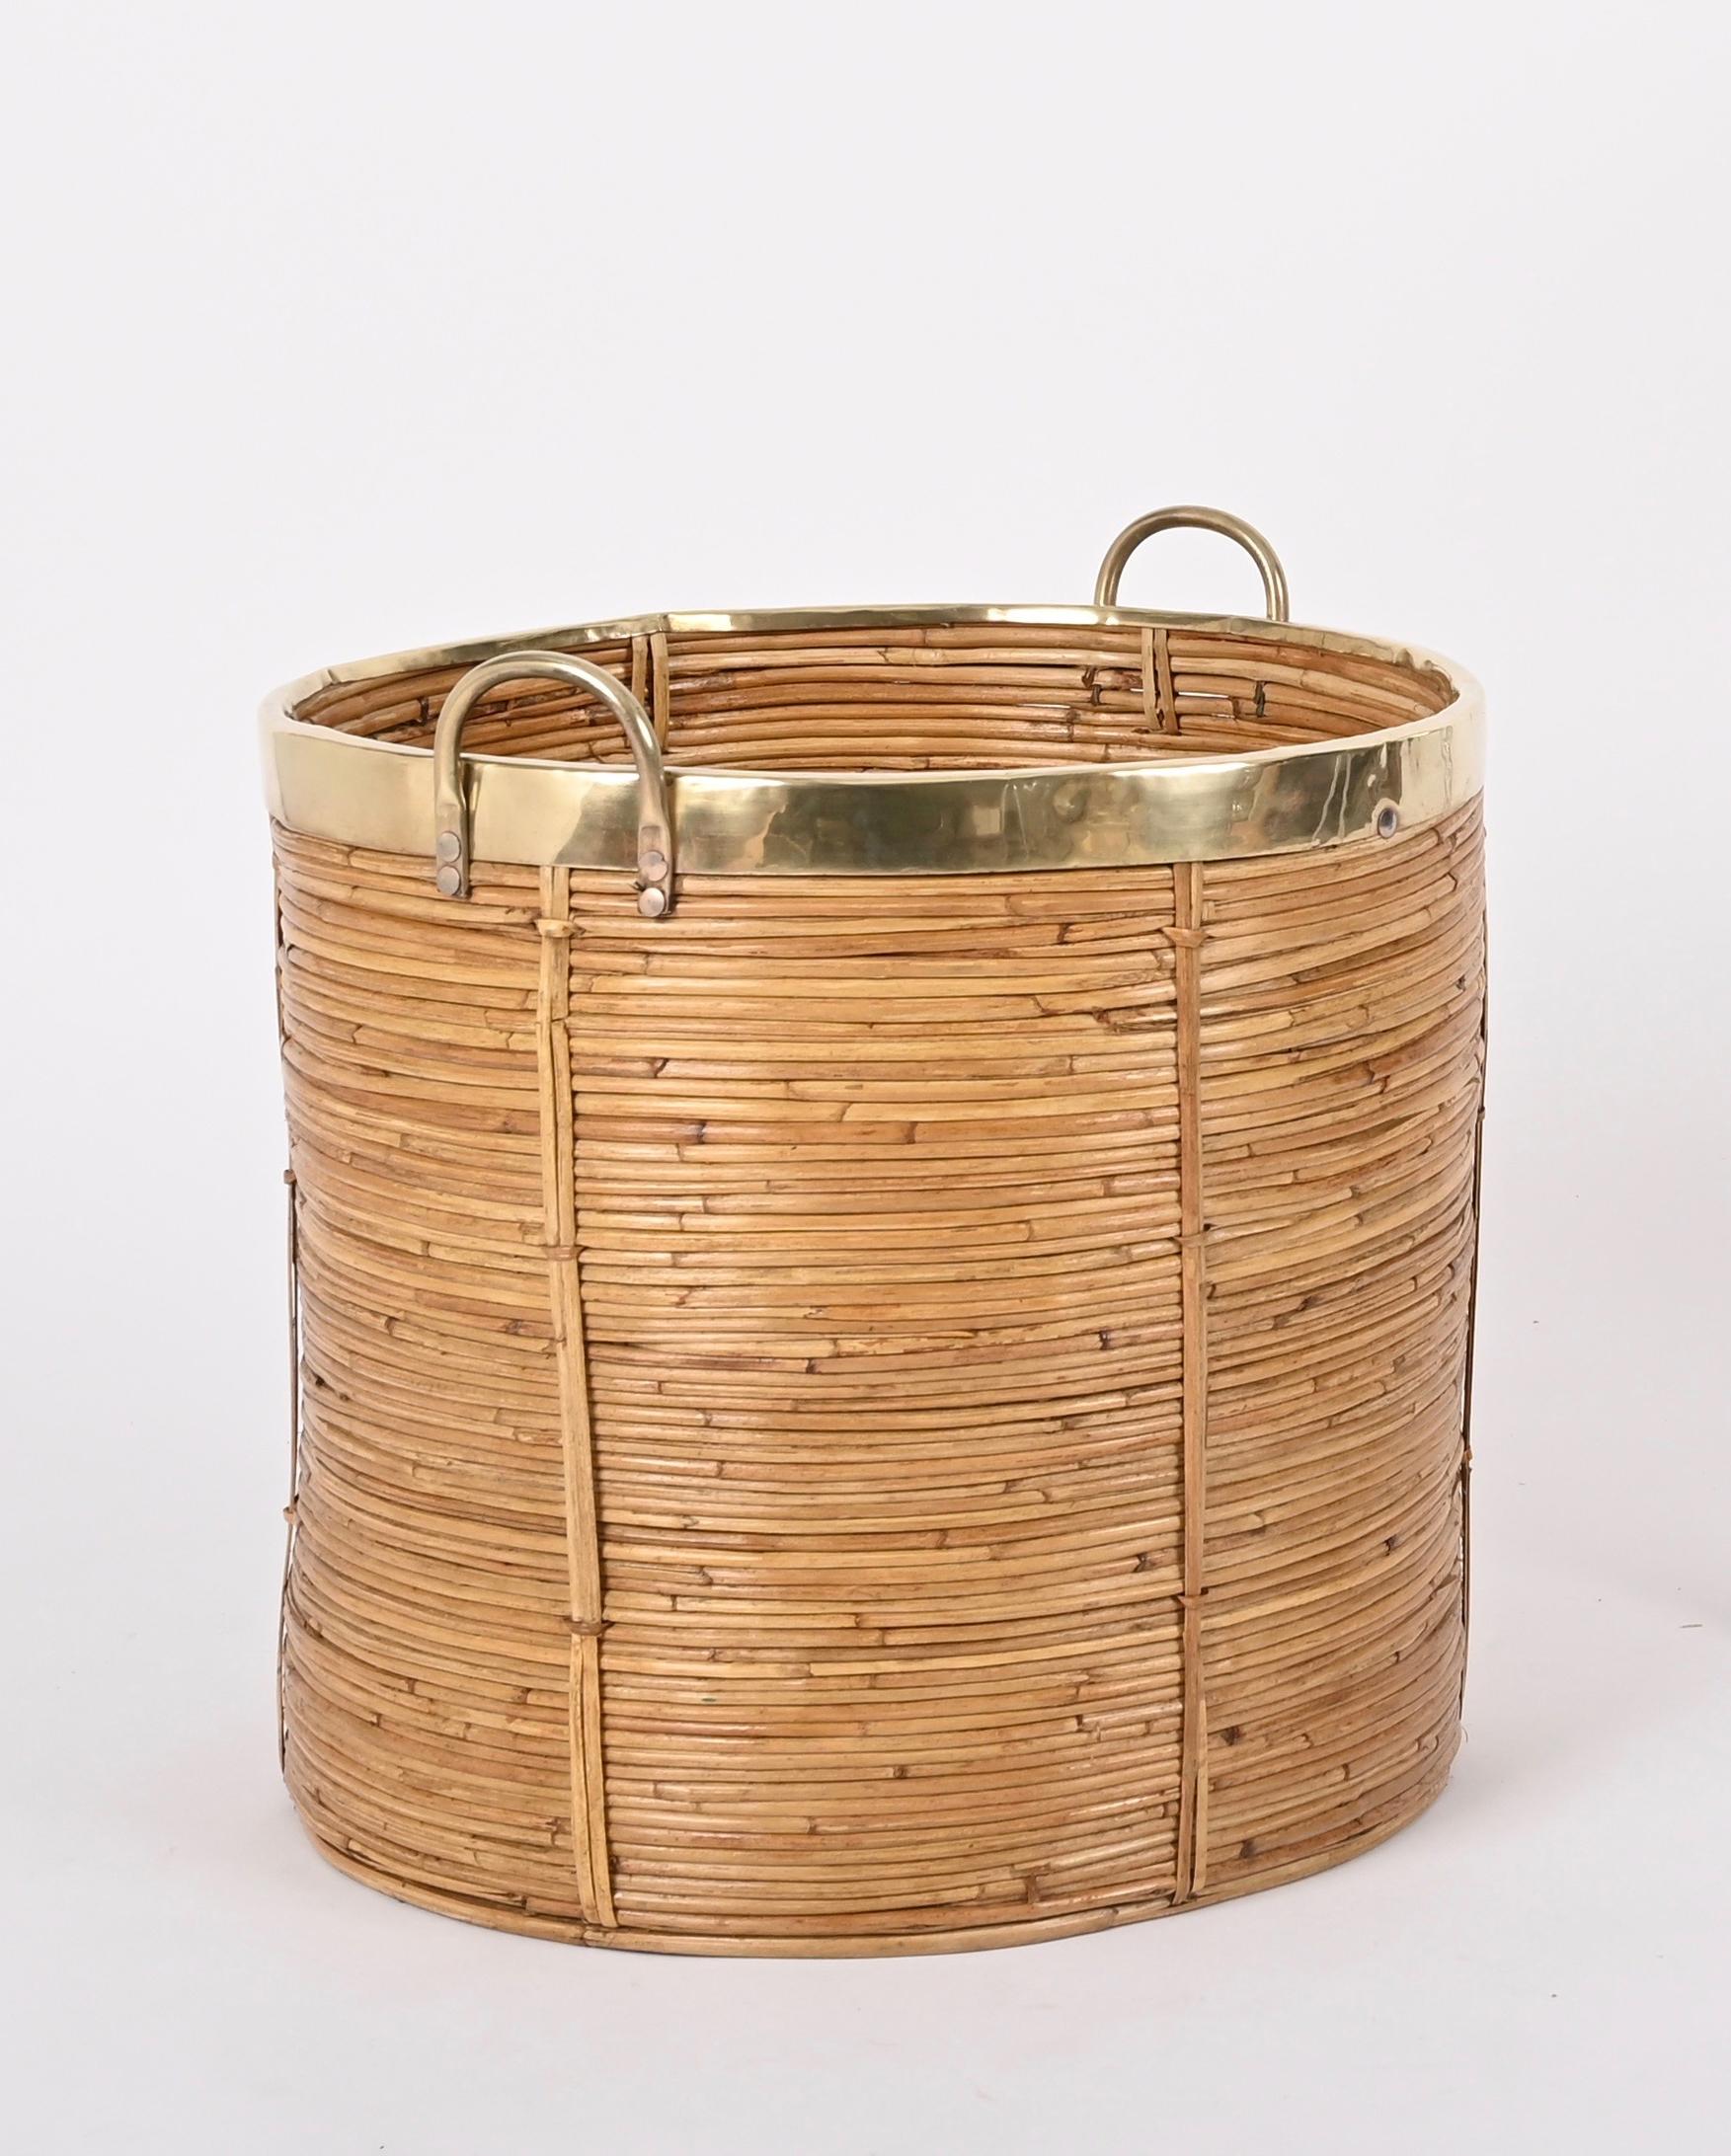 Midcentury Curved Rattan, Brass and Wicker Basket, Vivai del Sud, Italy 1970s For Sale 4